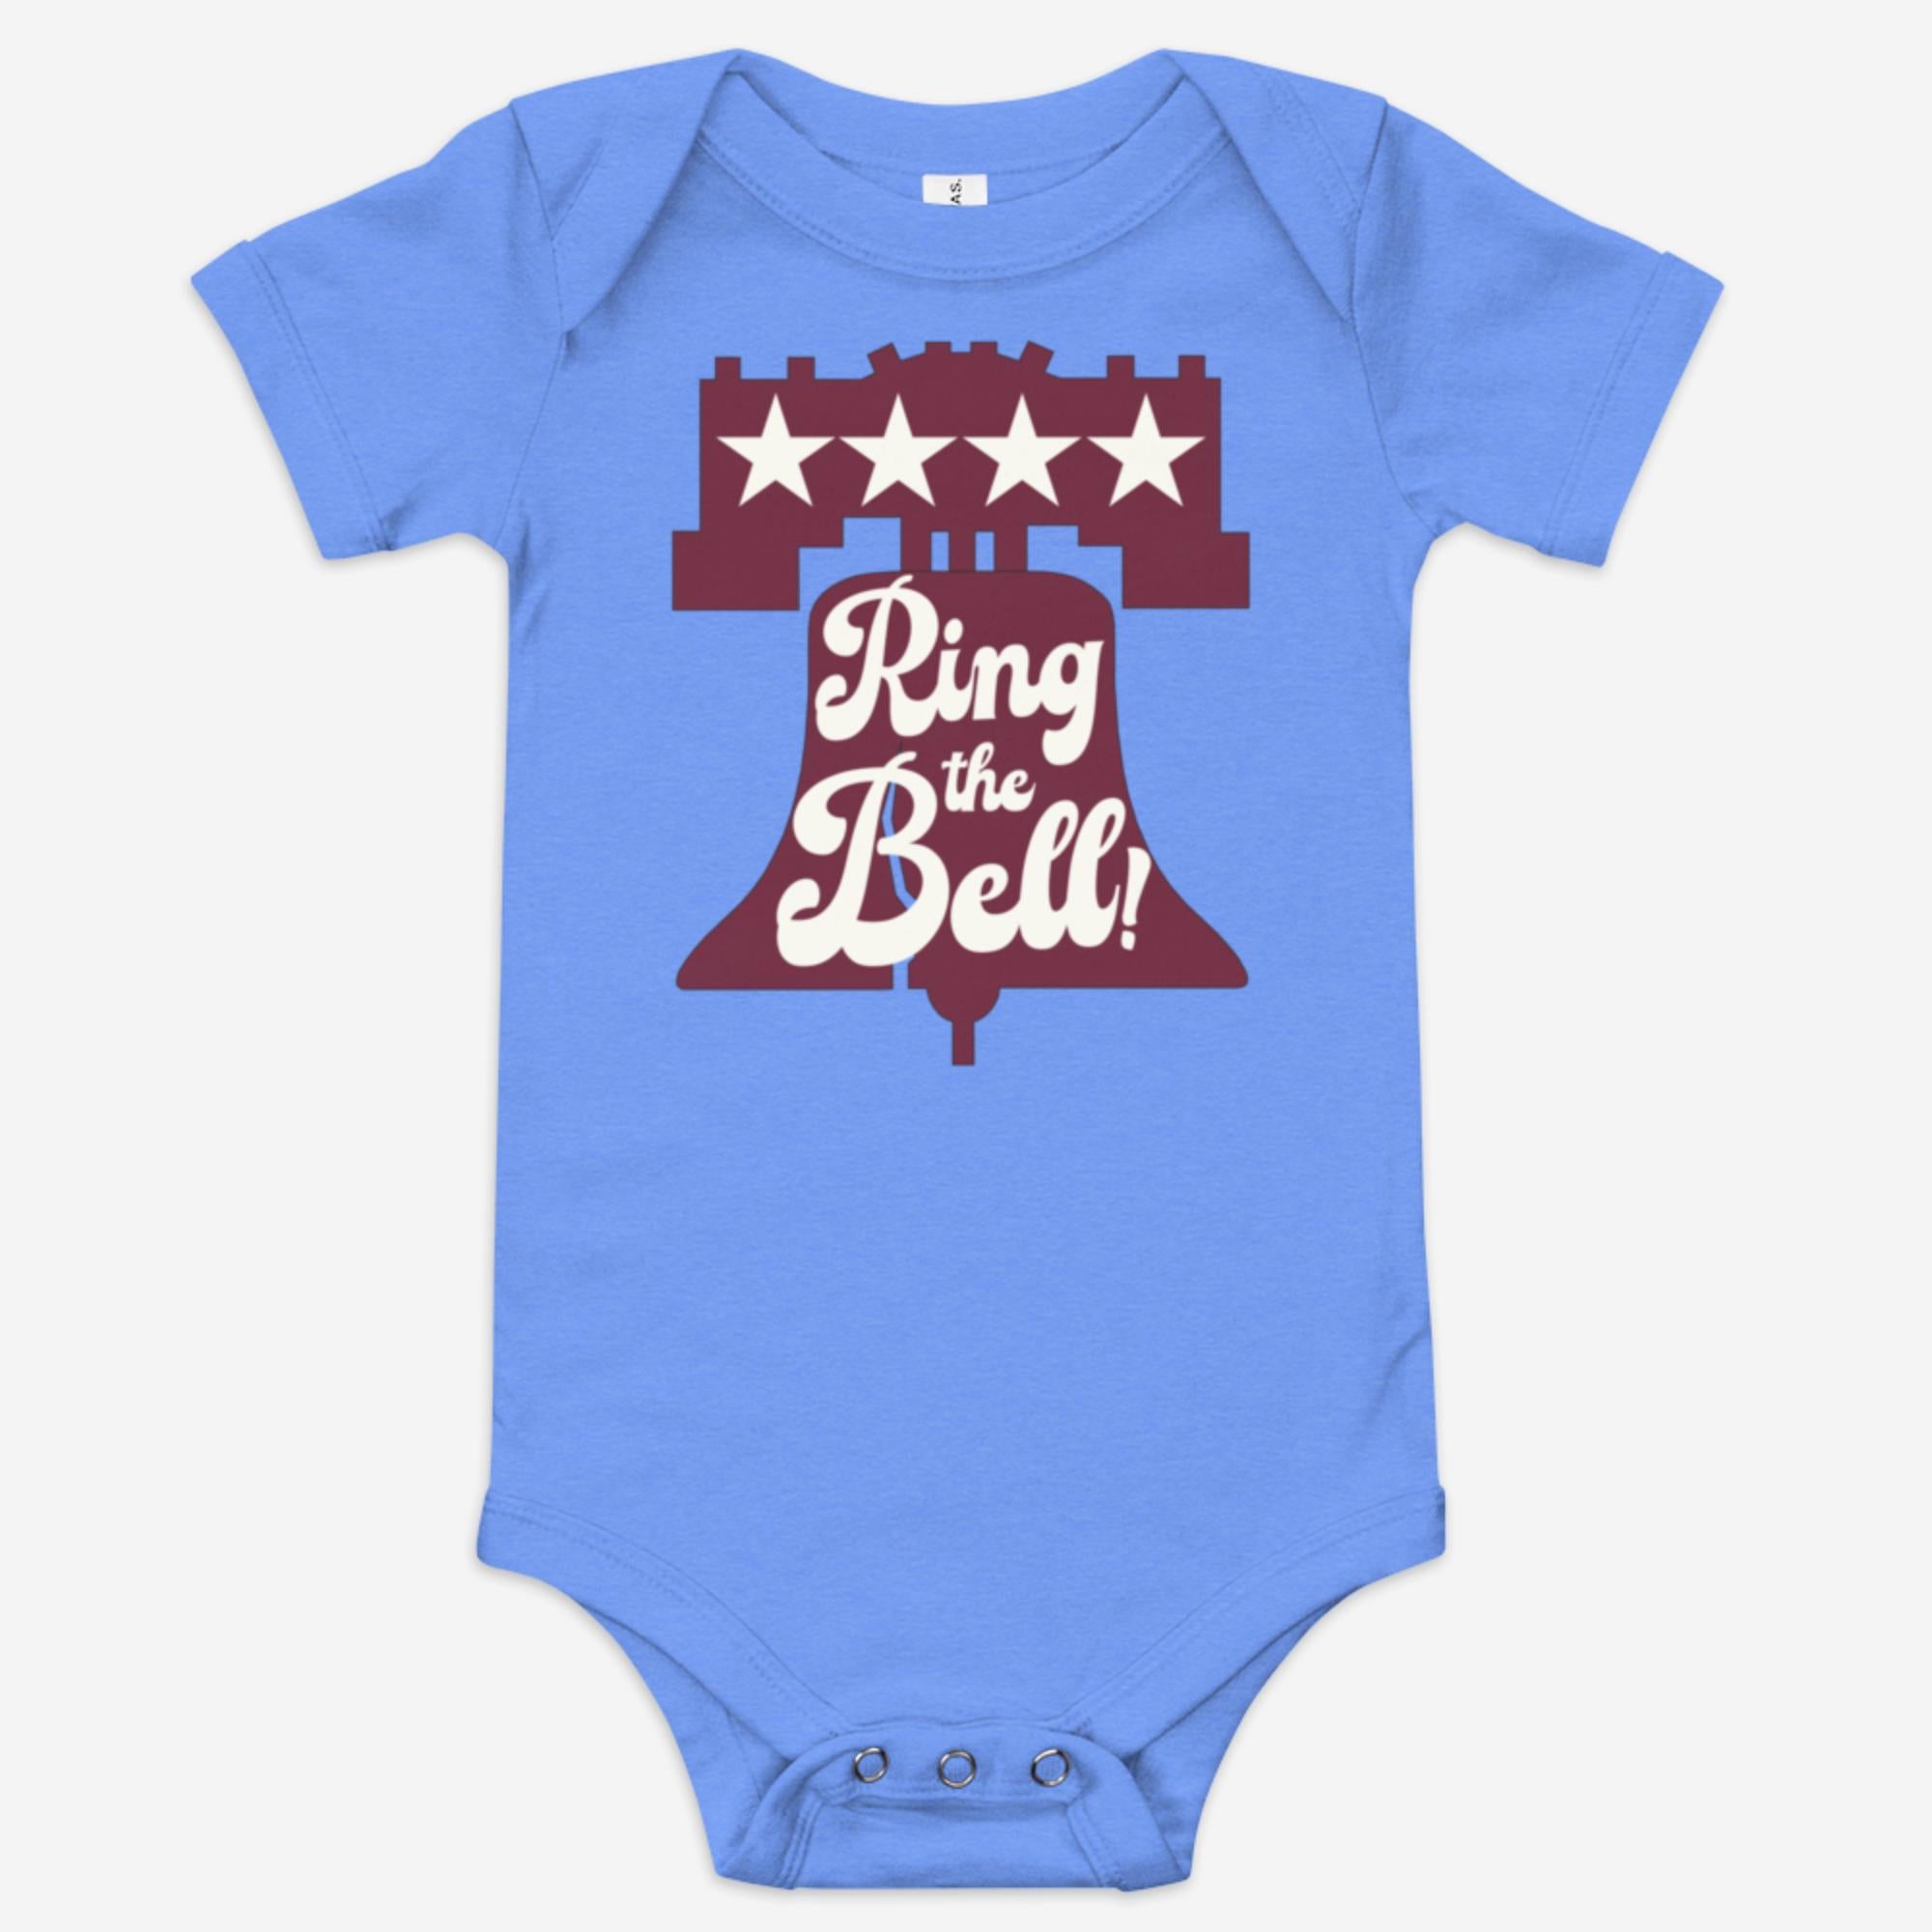 "Ring the Bell" Baby Onesie